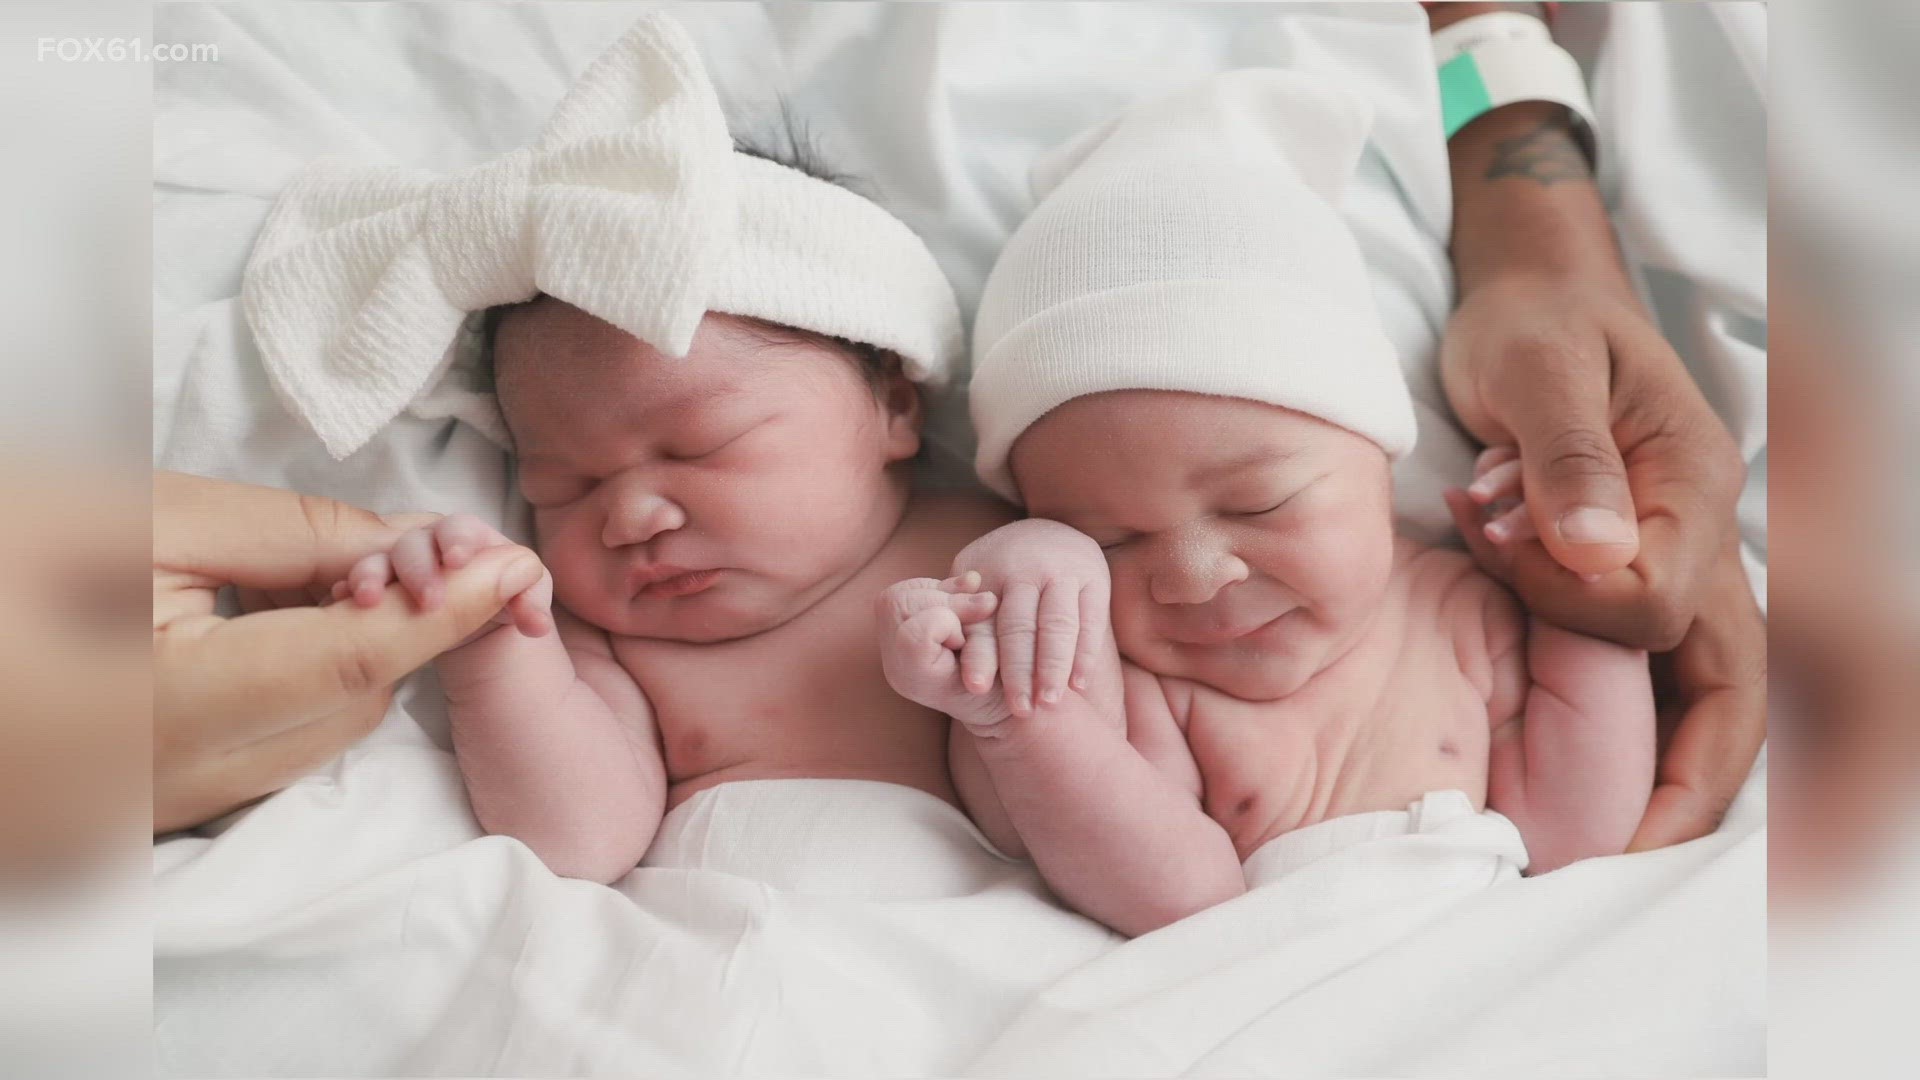 Twins were born at Yale New Haven Hospital during the New Year's festivities, with one baby bringing an end to 2023 and another ringing in 2024.